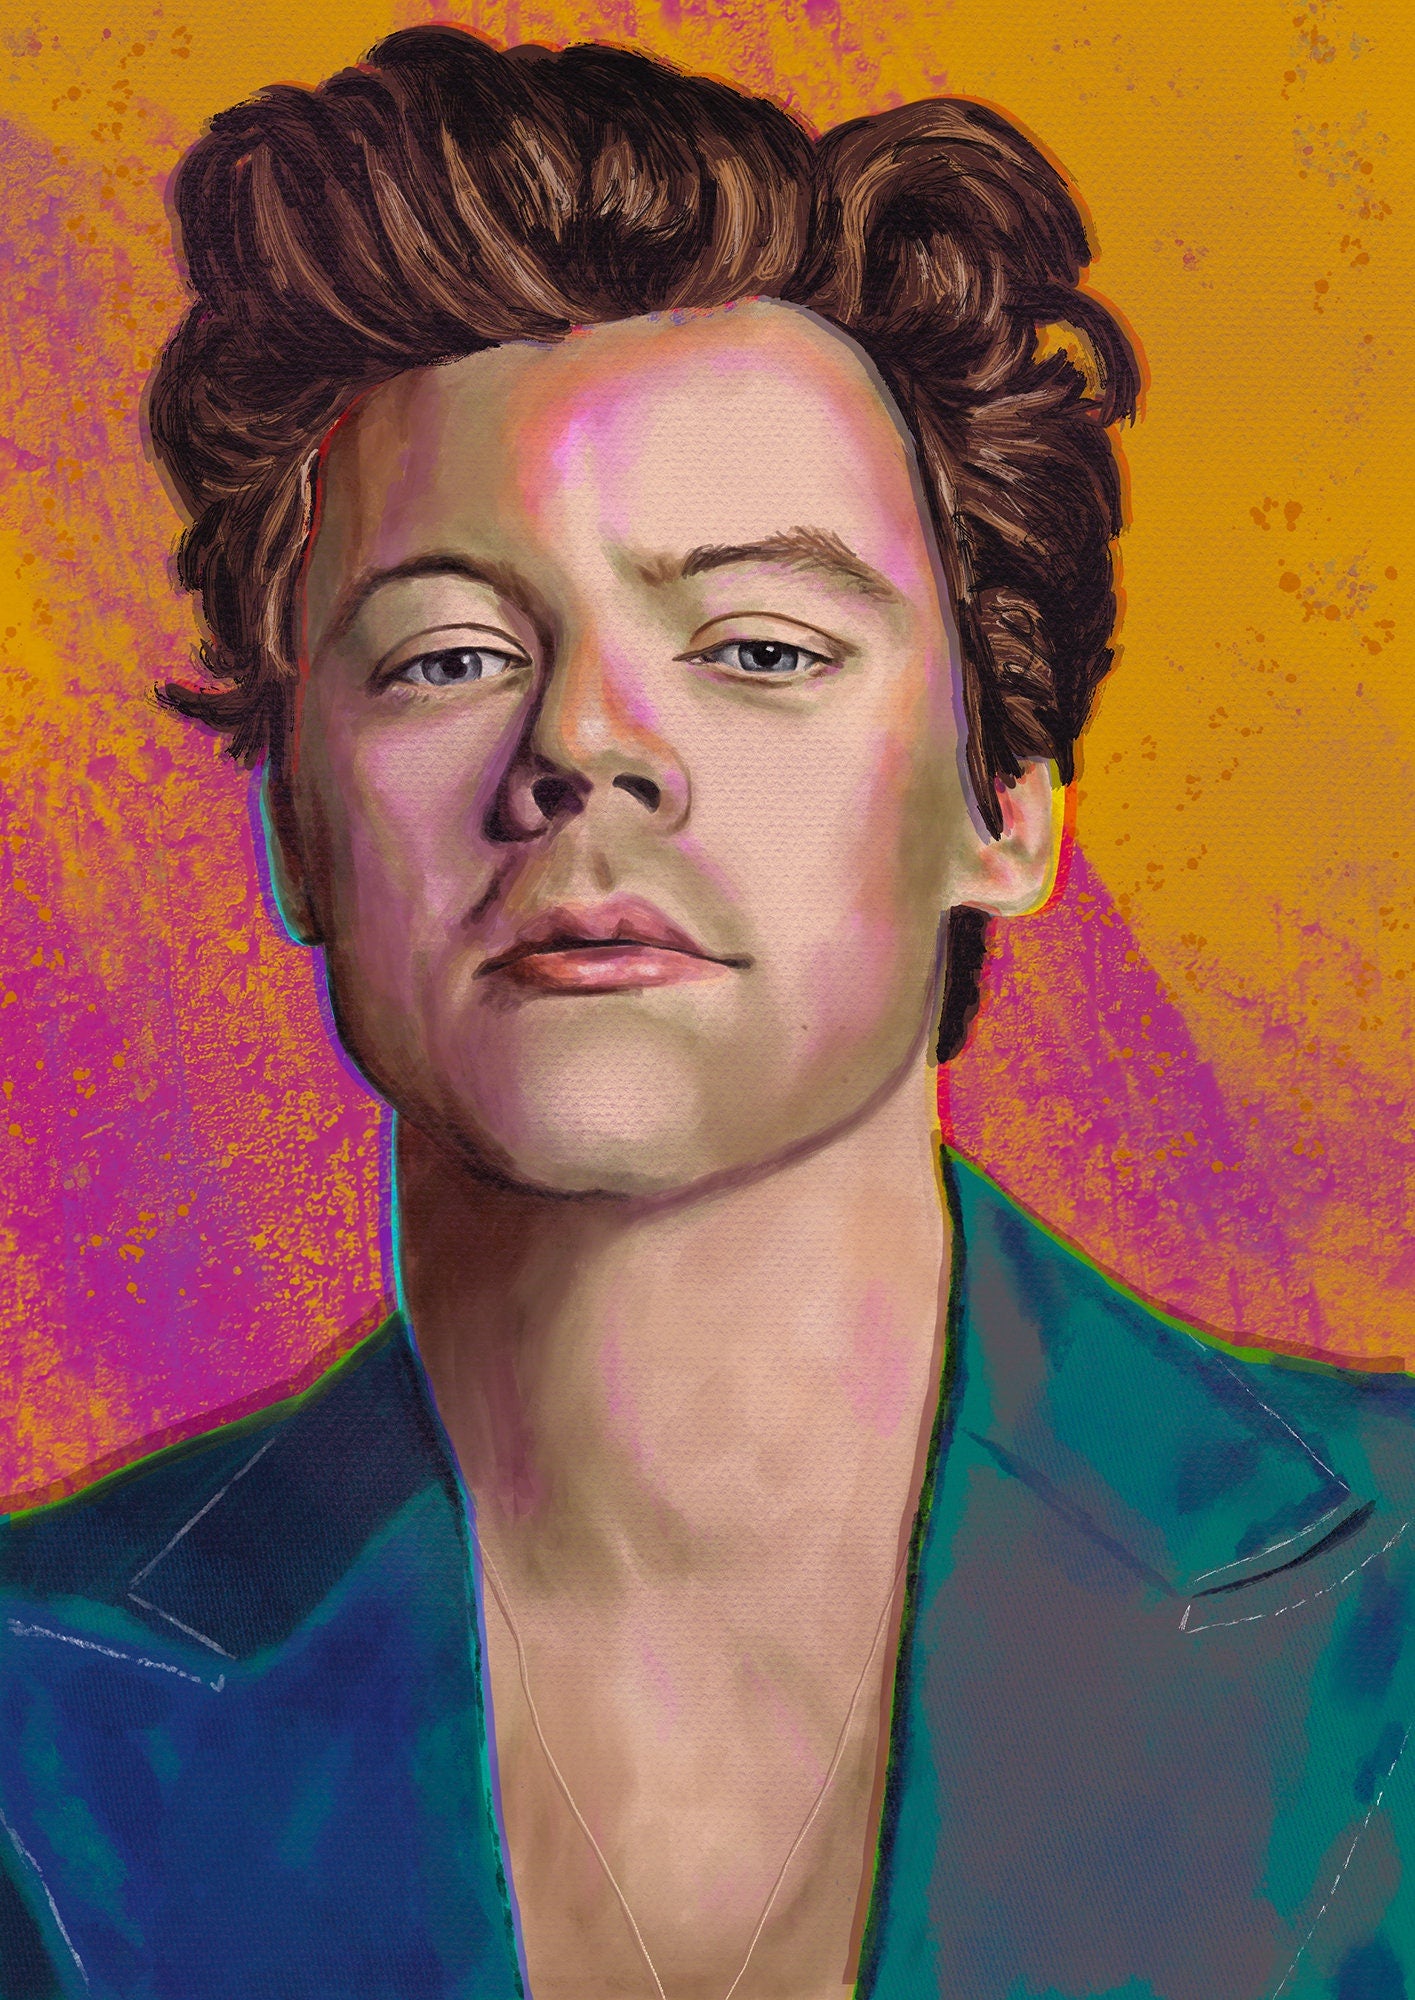 Harry Styles greeting card, One Direction card, Harry Styles fan gift, Harry Styles birthday card, personalised card, Harry Styles pop art